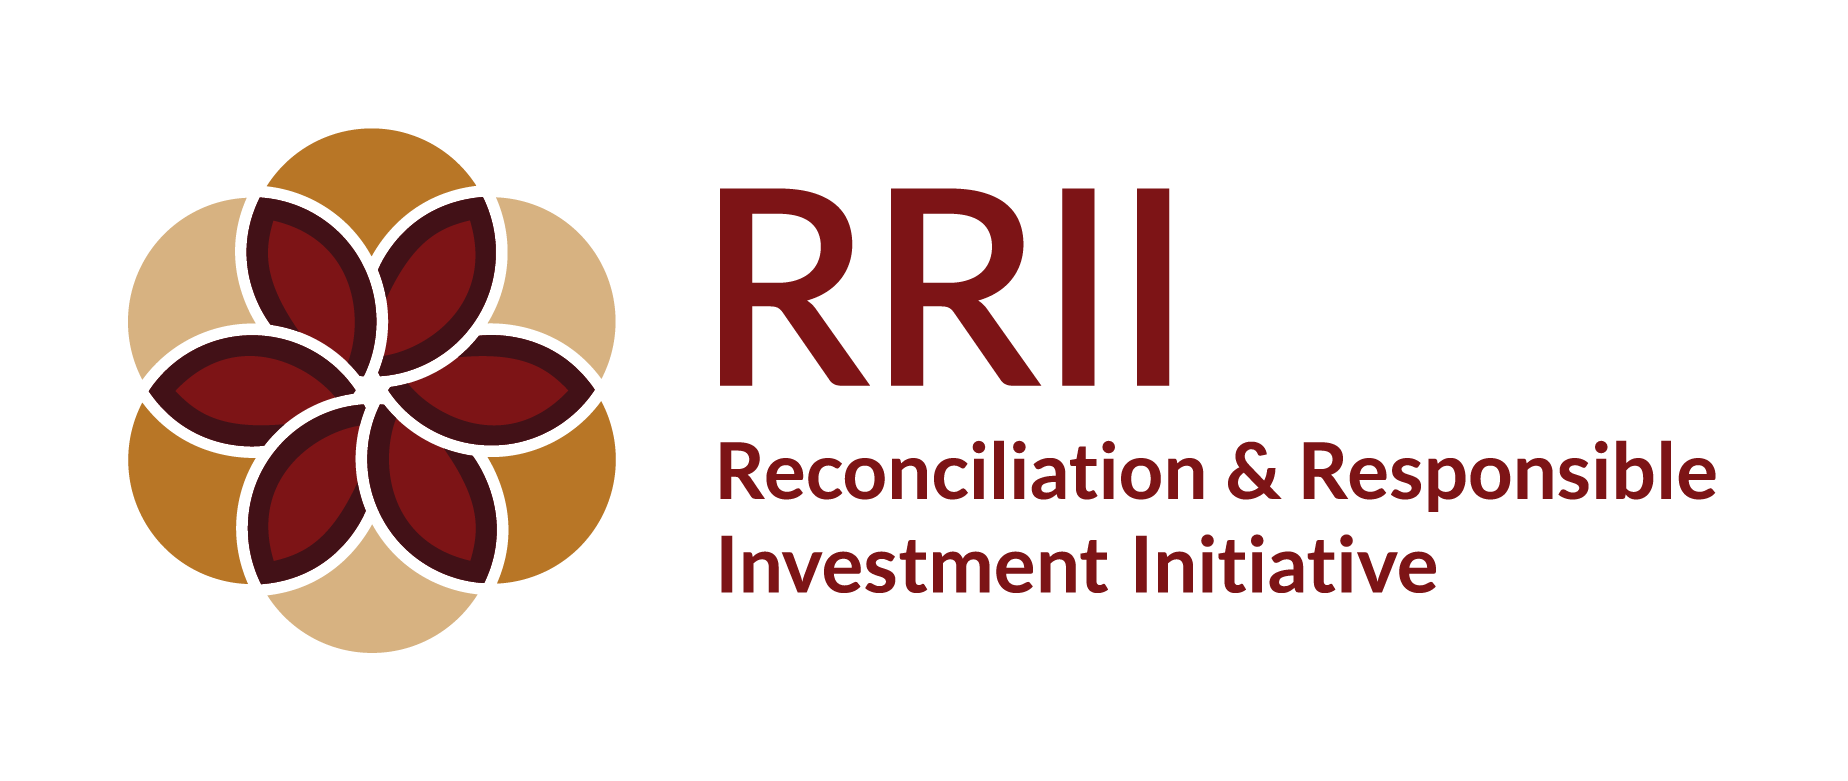 Reconciliation and Responsible Investment Initiative (RRII)